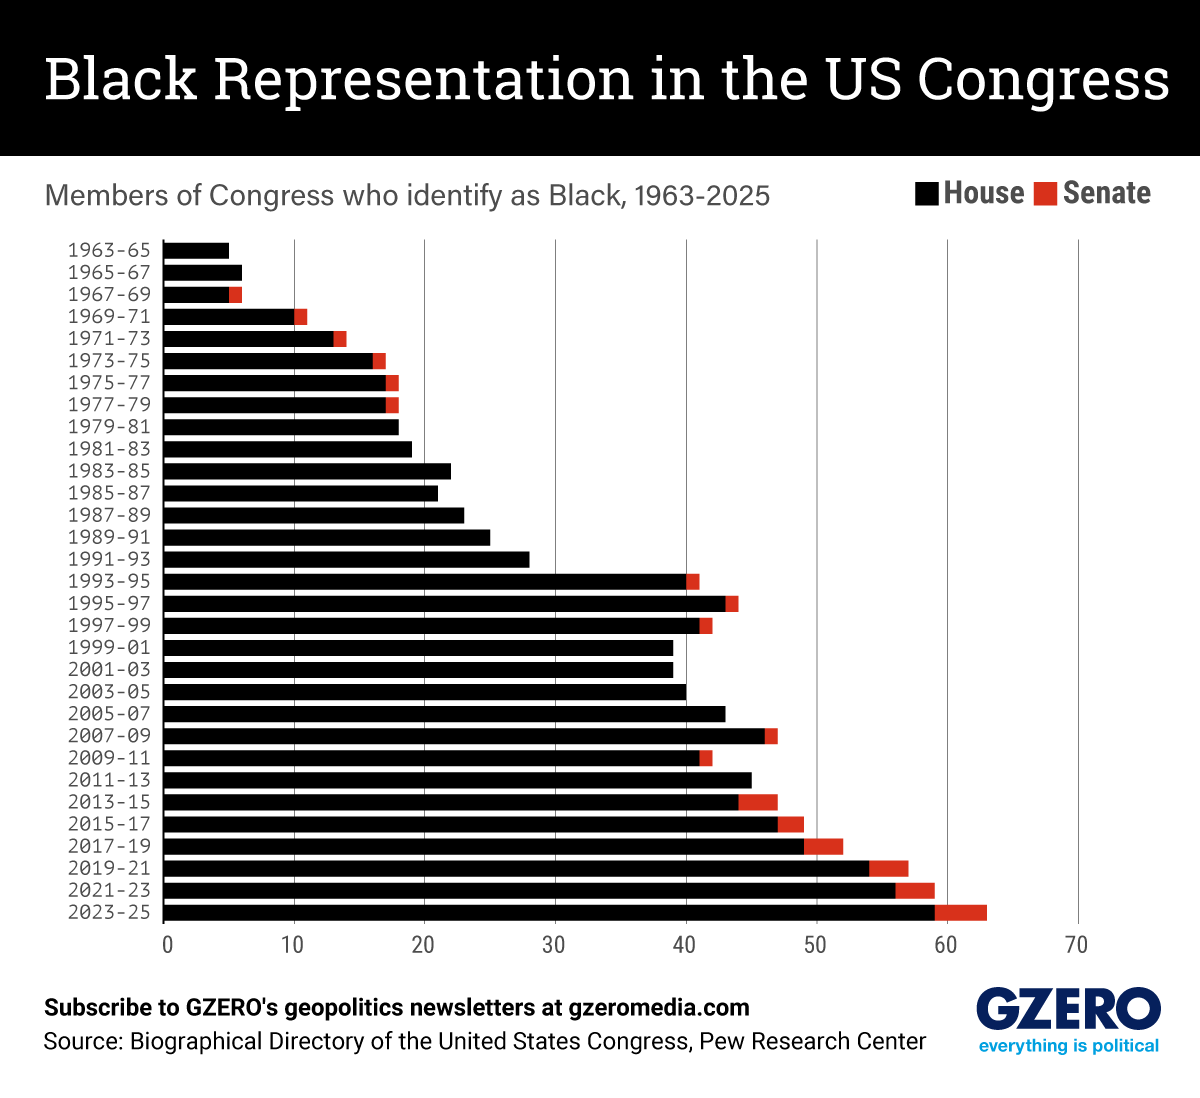 The Graphic Truth: Black representation in the US Congress